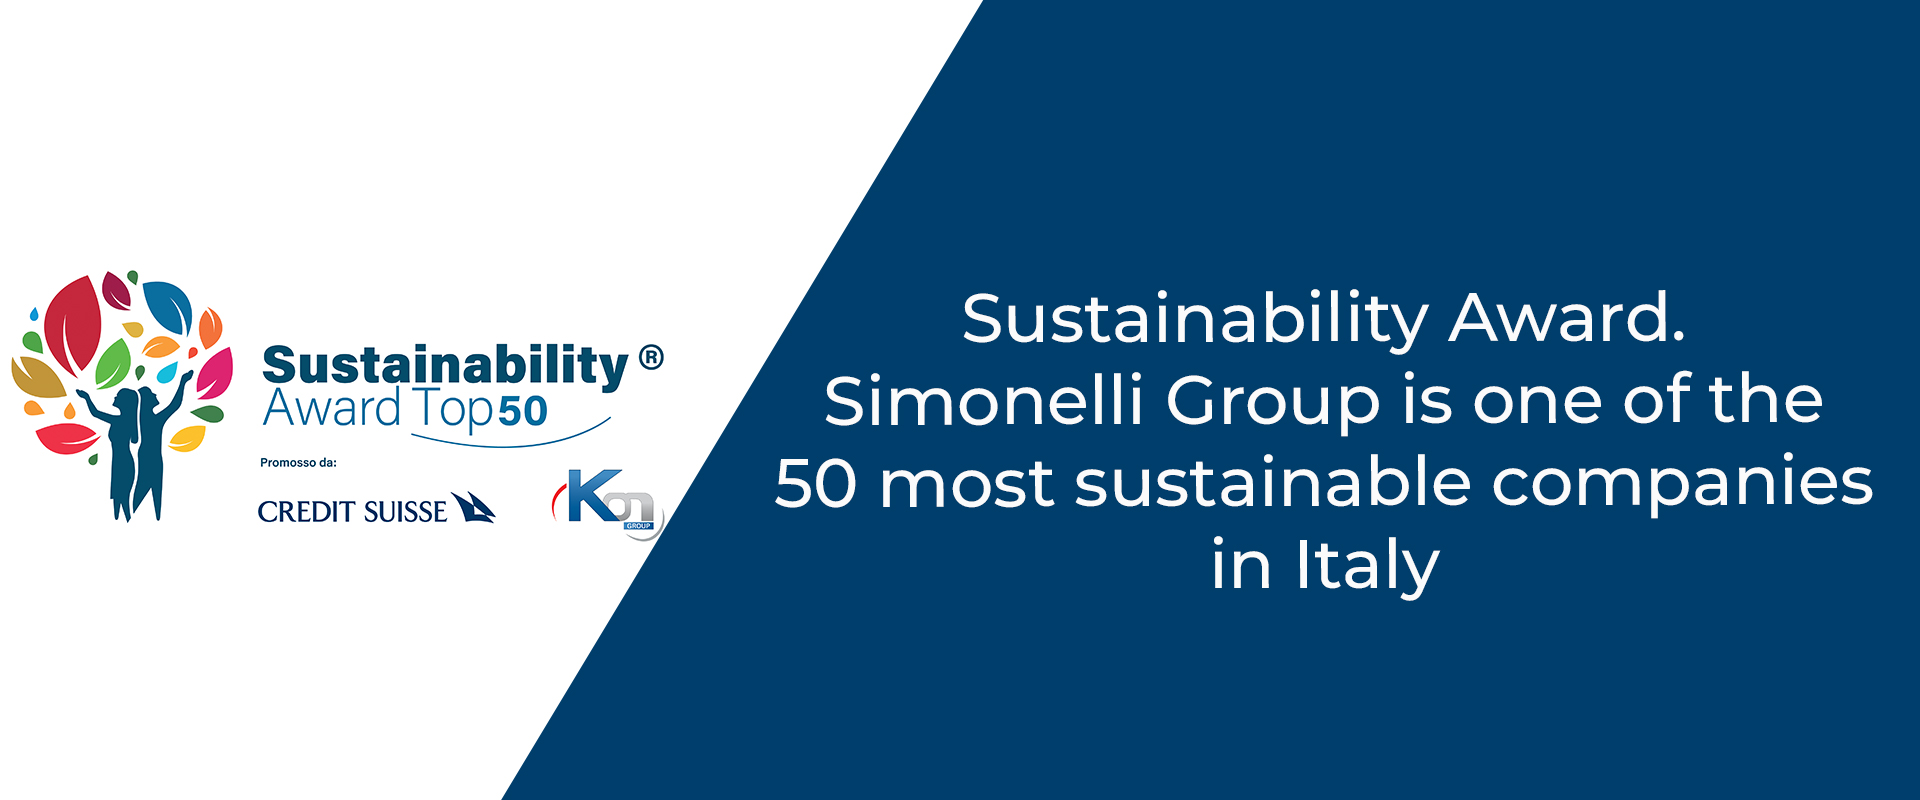 SUSTAINABILITY AWARD. SIMONELLI GROUP IS ONE OF THE 50 MOST SUSTAINABLE COMPANIES IN ITALY